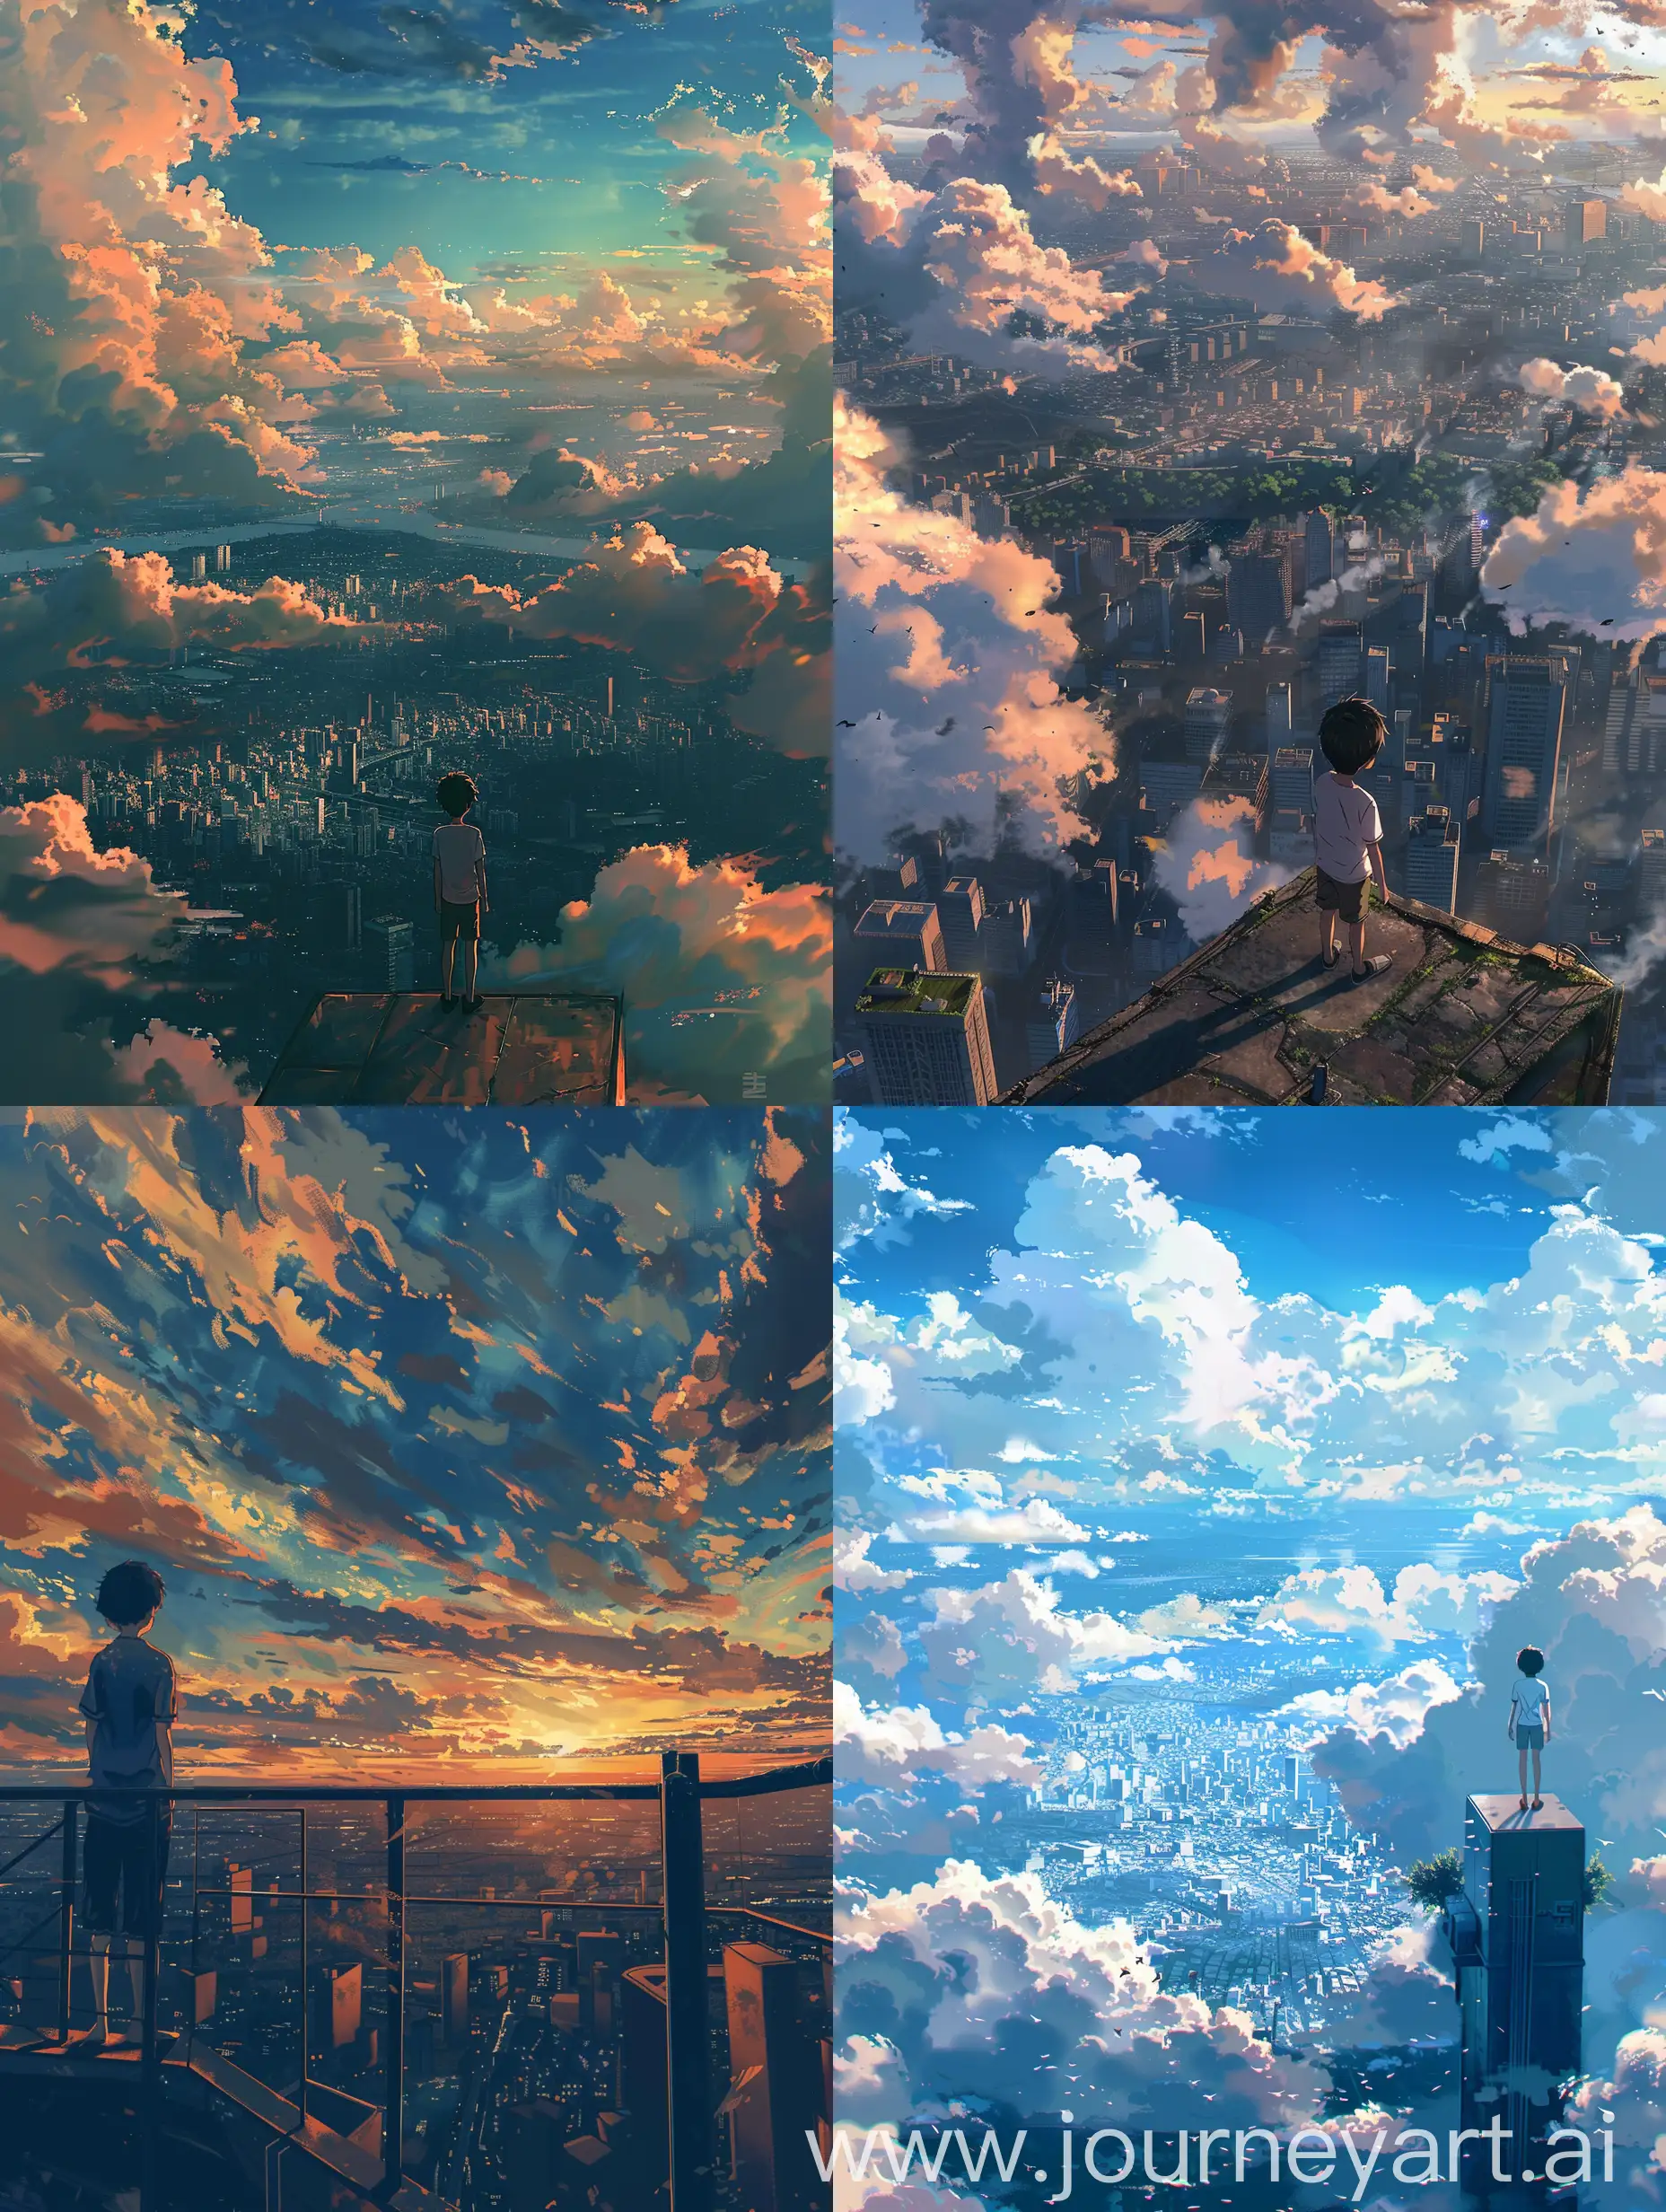 Anime style,a boy viewing city froma high place like a tower ,makato shinkai style,beautiful long broken many clouds,avoid bad and distorted view of the boy,avoid bad bodyview,summers,afternoon,anime aesthetic movie concept image.